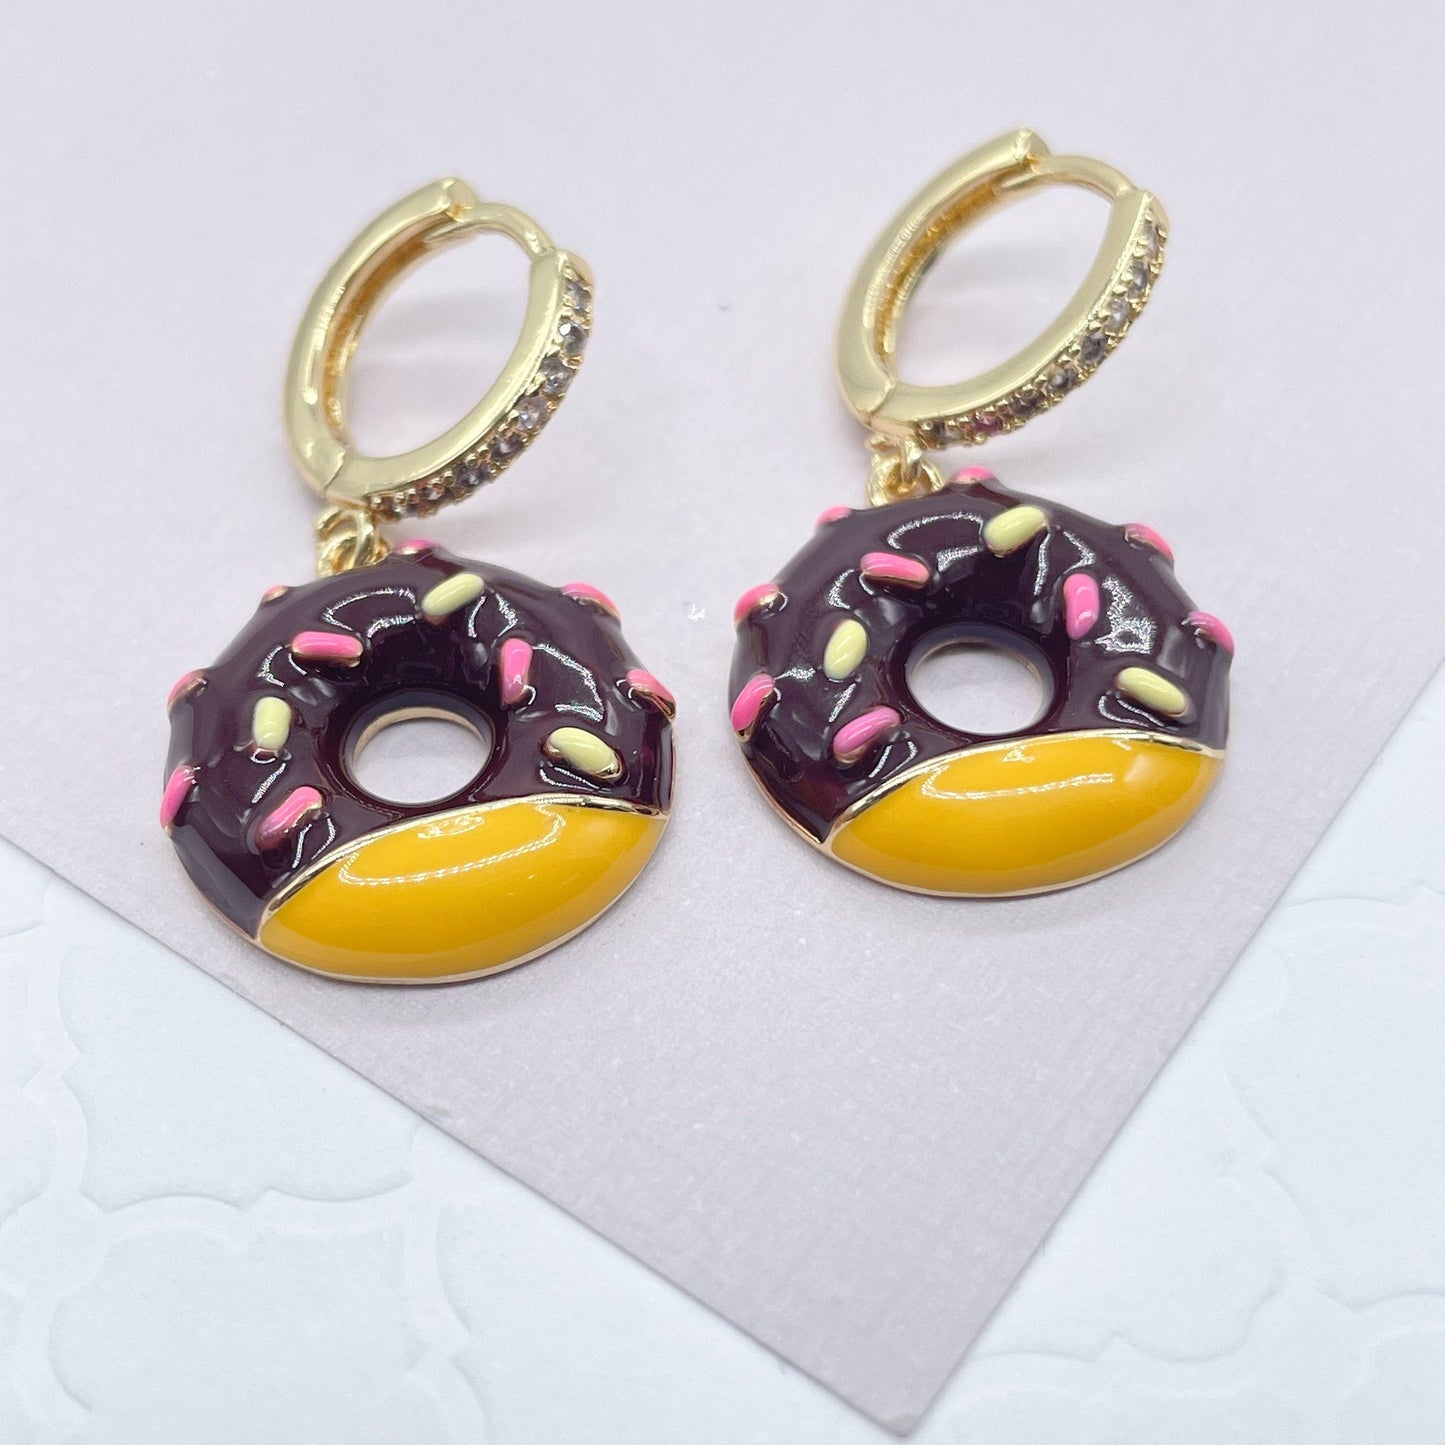 18K Gold Layered Colorful Donut Earrings Available In Different Colors And Tastes